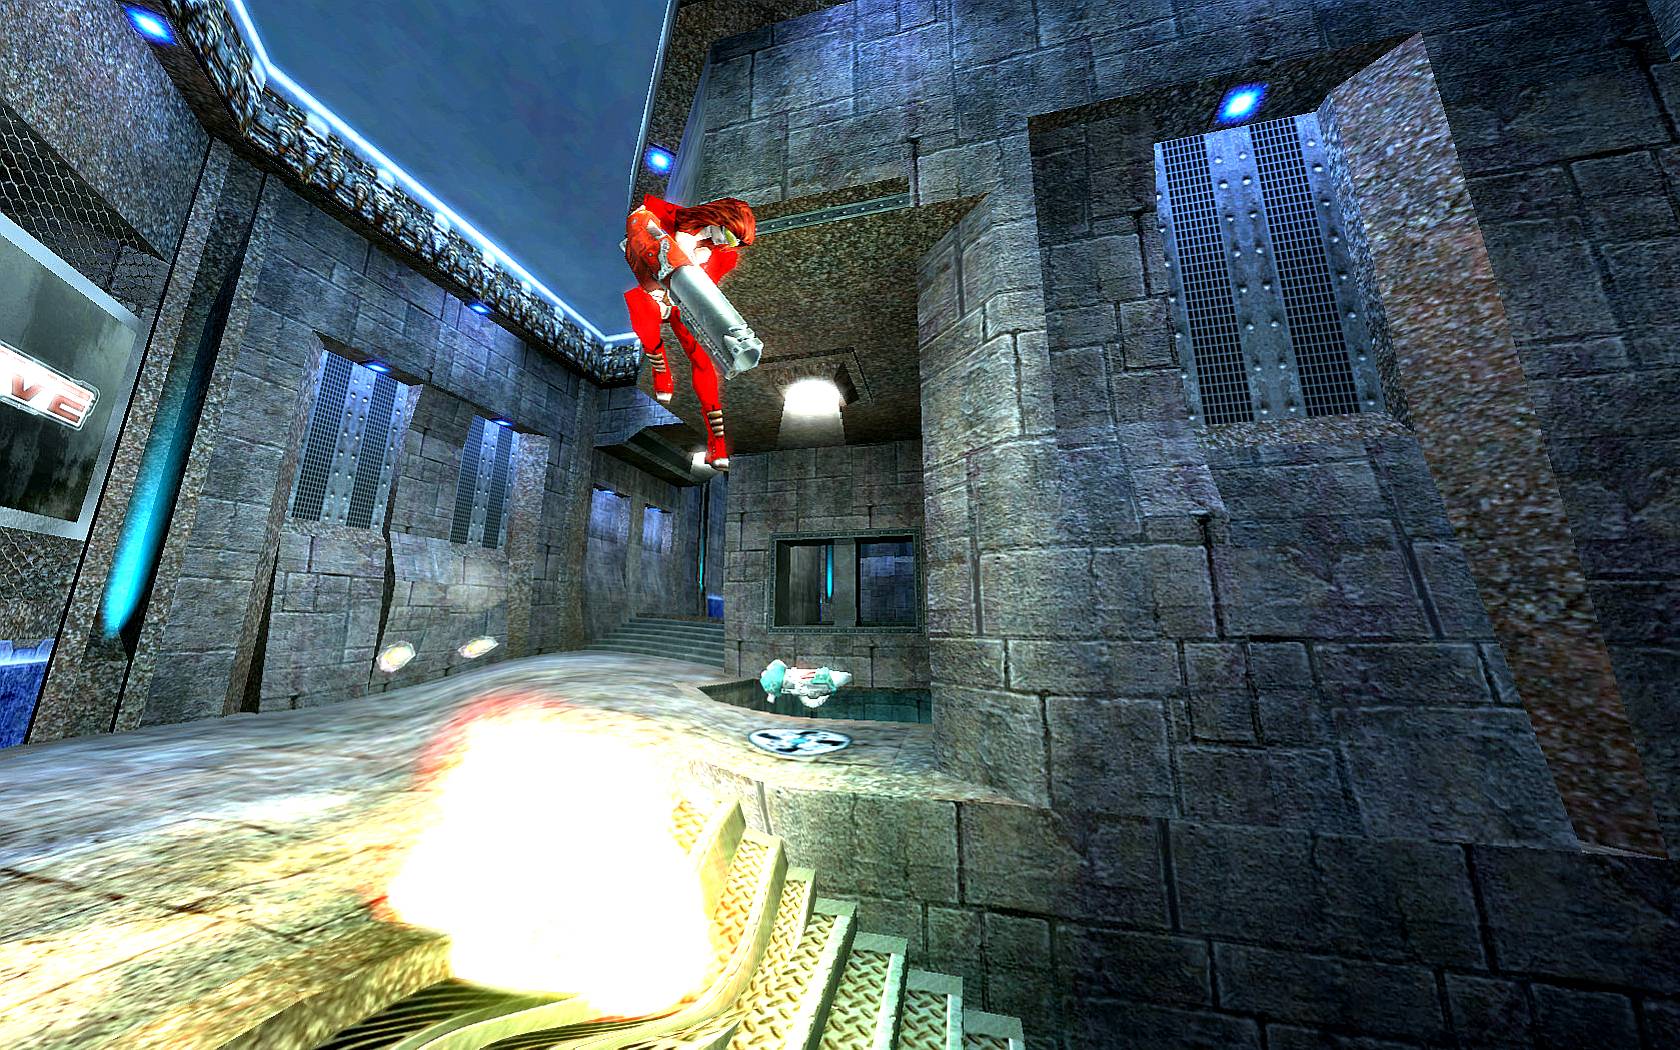 Rocket jumping has been around for years, being utilized in competitive online FPS games like Quake and Team Fortress 2